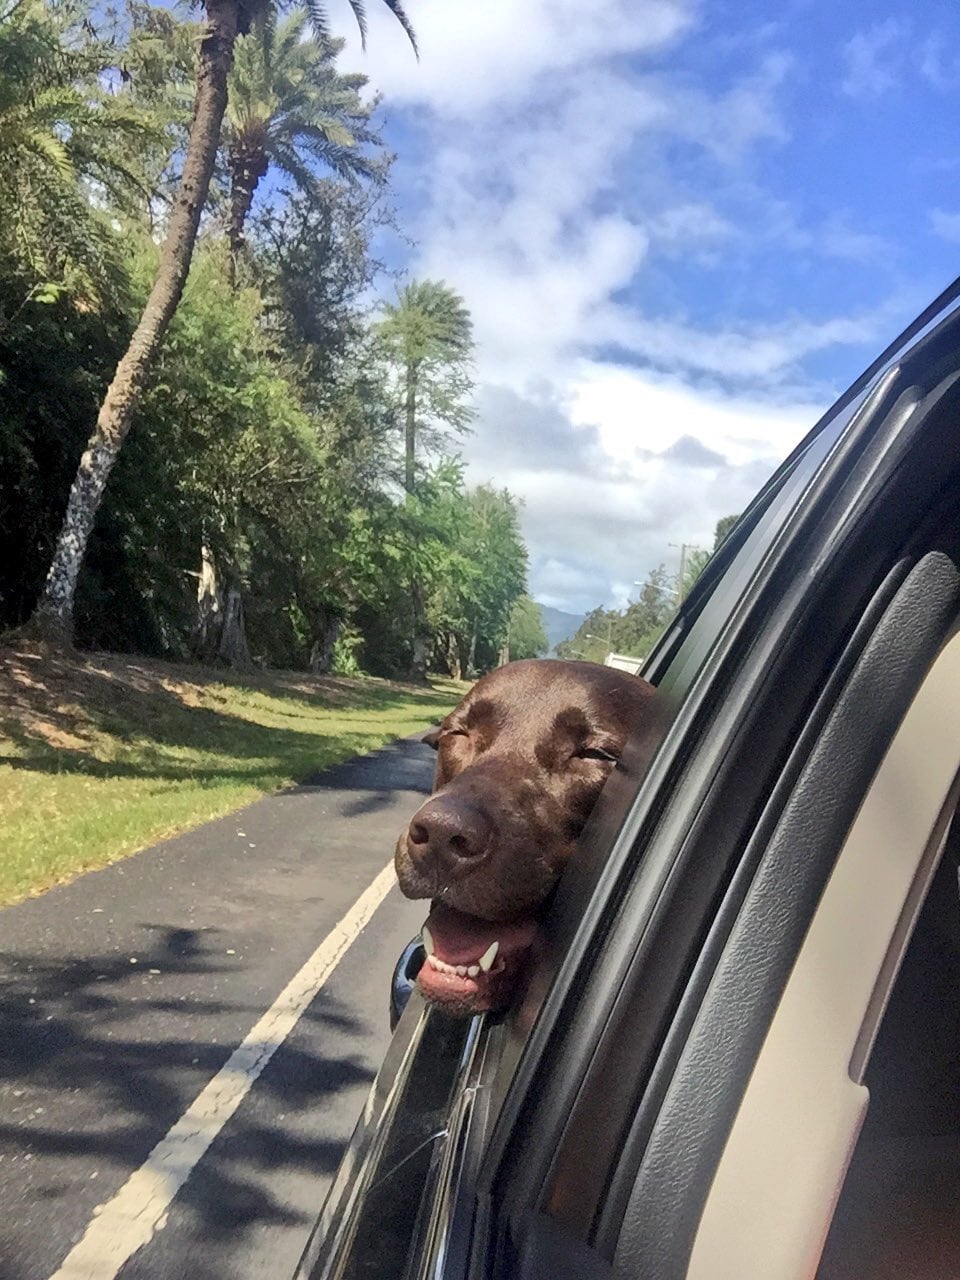  5 TIPS FOR TRAVELING WITH DOGS | dog with his head out the car window